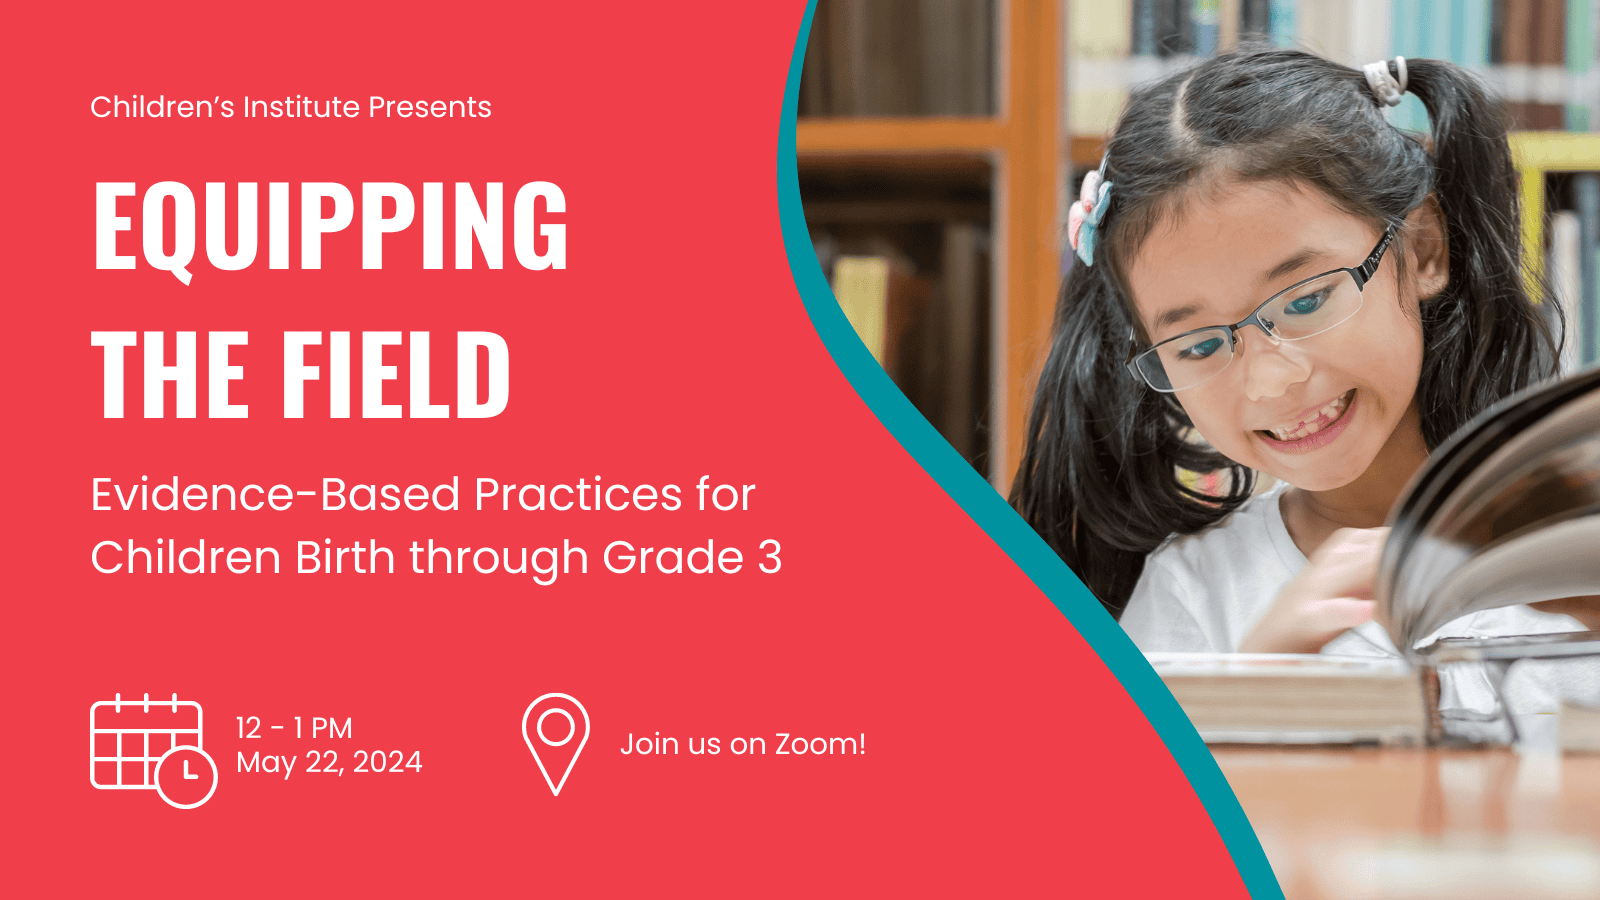 Equipping the Field: Evidence-Based Practices for Children Birth through Grade 3